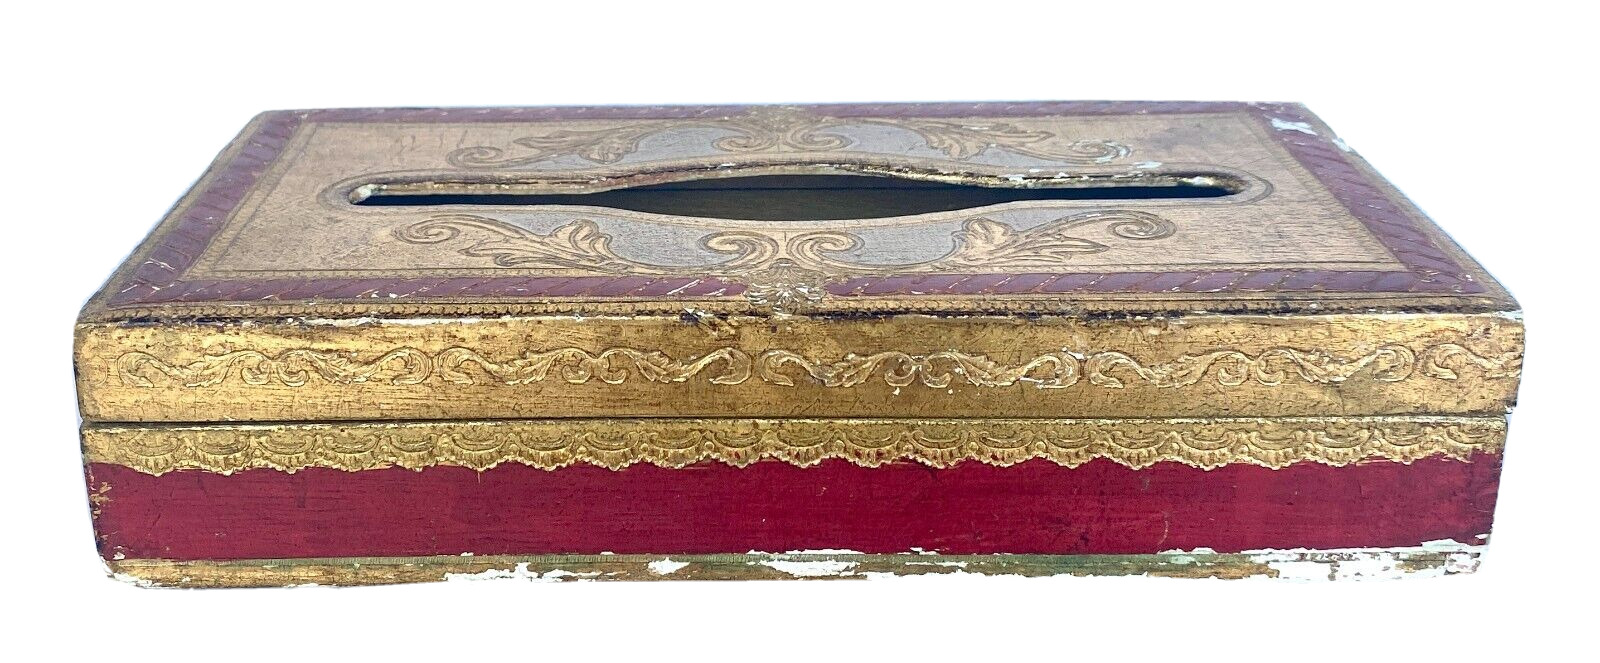 Vintage Florentine Tole Painted Wood Tissue Box/Holder - Italy - Red & Gold